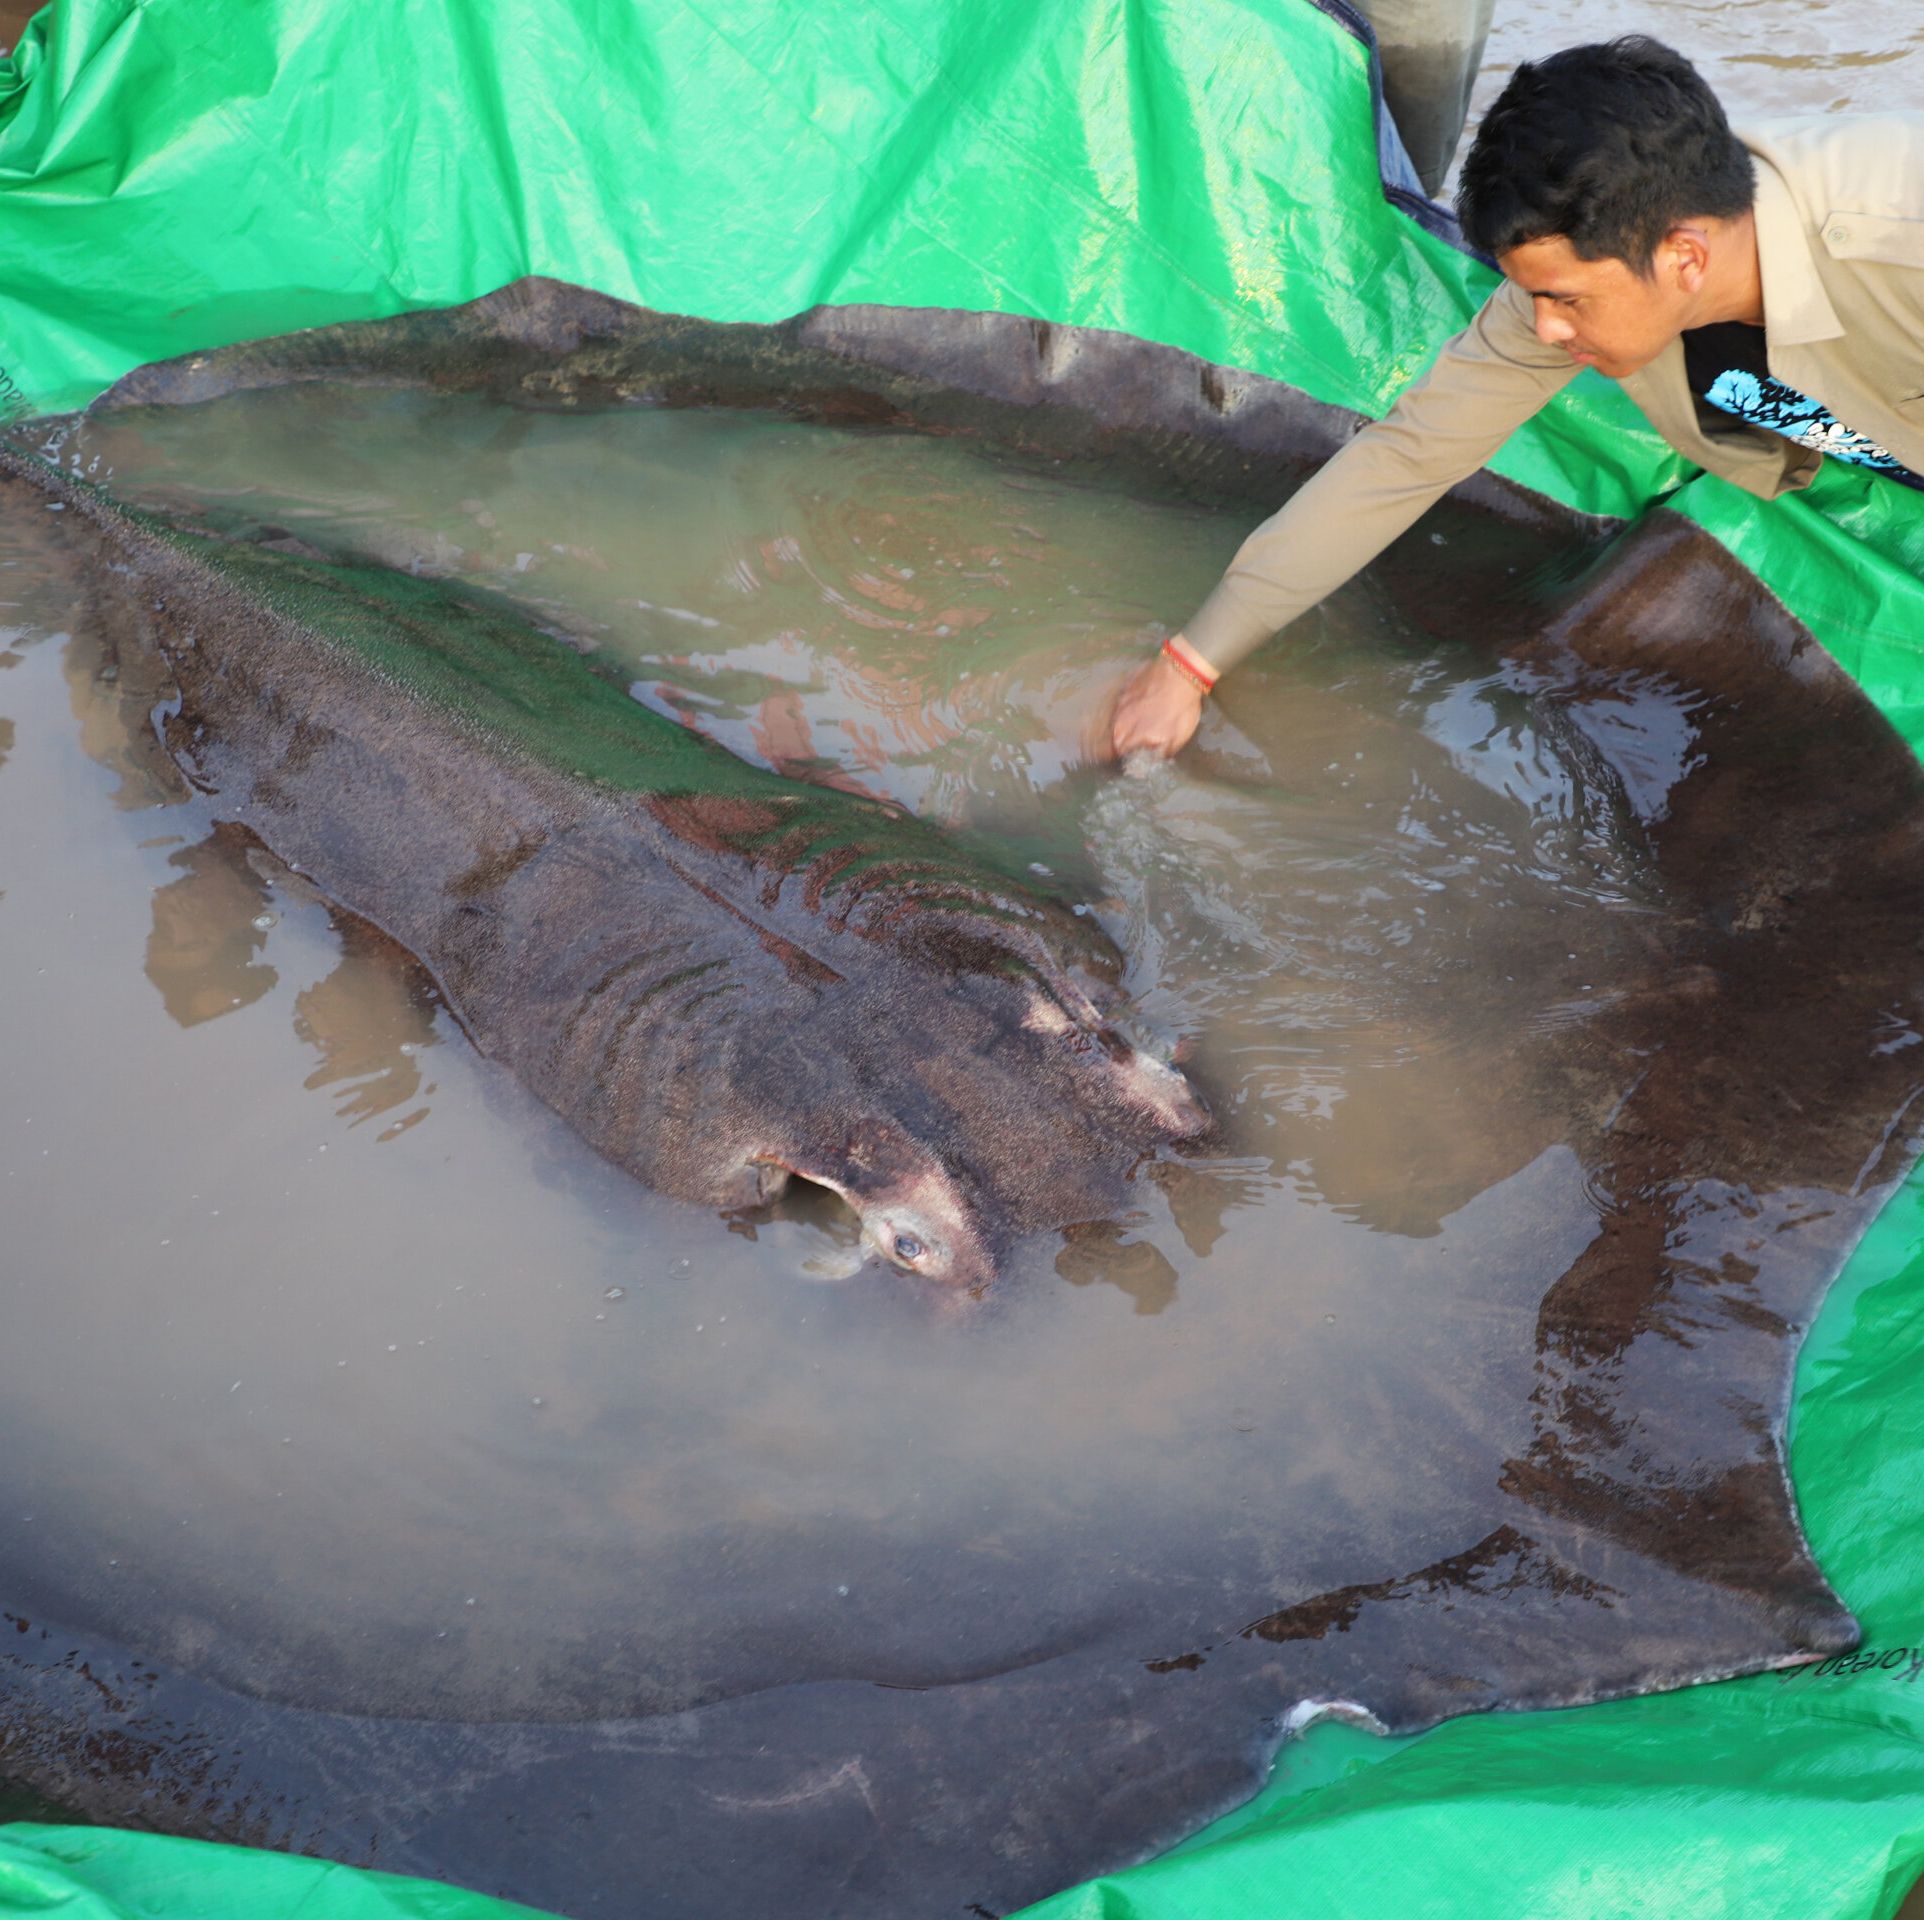 How the World's Largest Freshwater Fish Grew to a Whopping 660 Pounds